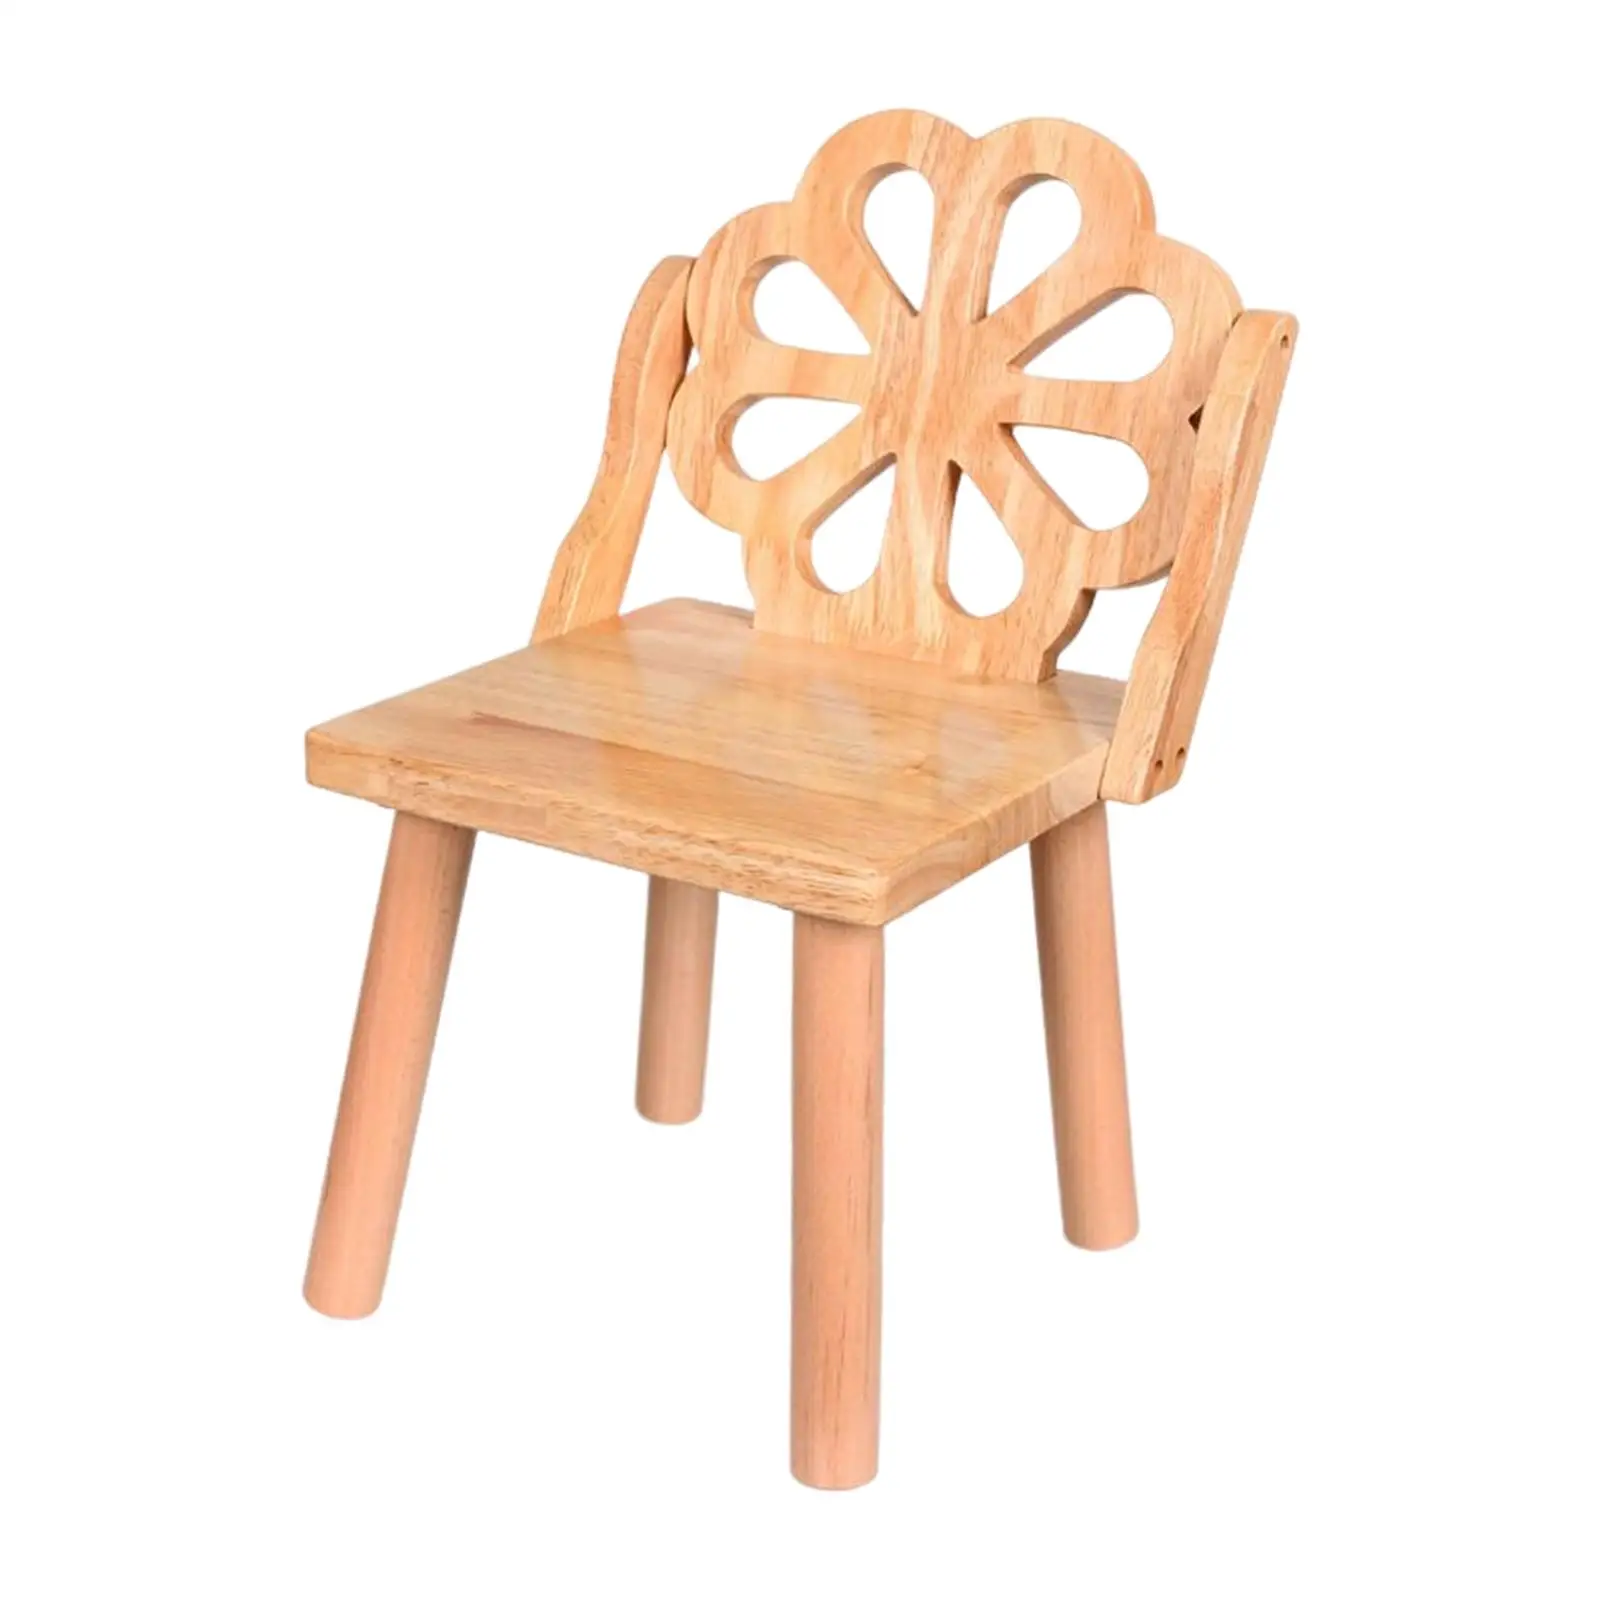 Wood Removable Wooden Child Stool Space Saving Ultralight Protable Wooden Kindergarten game Small Seat Stool for Kids